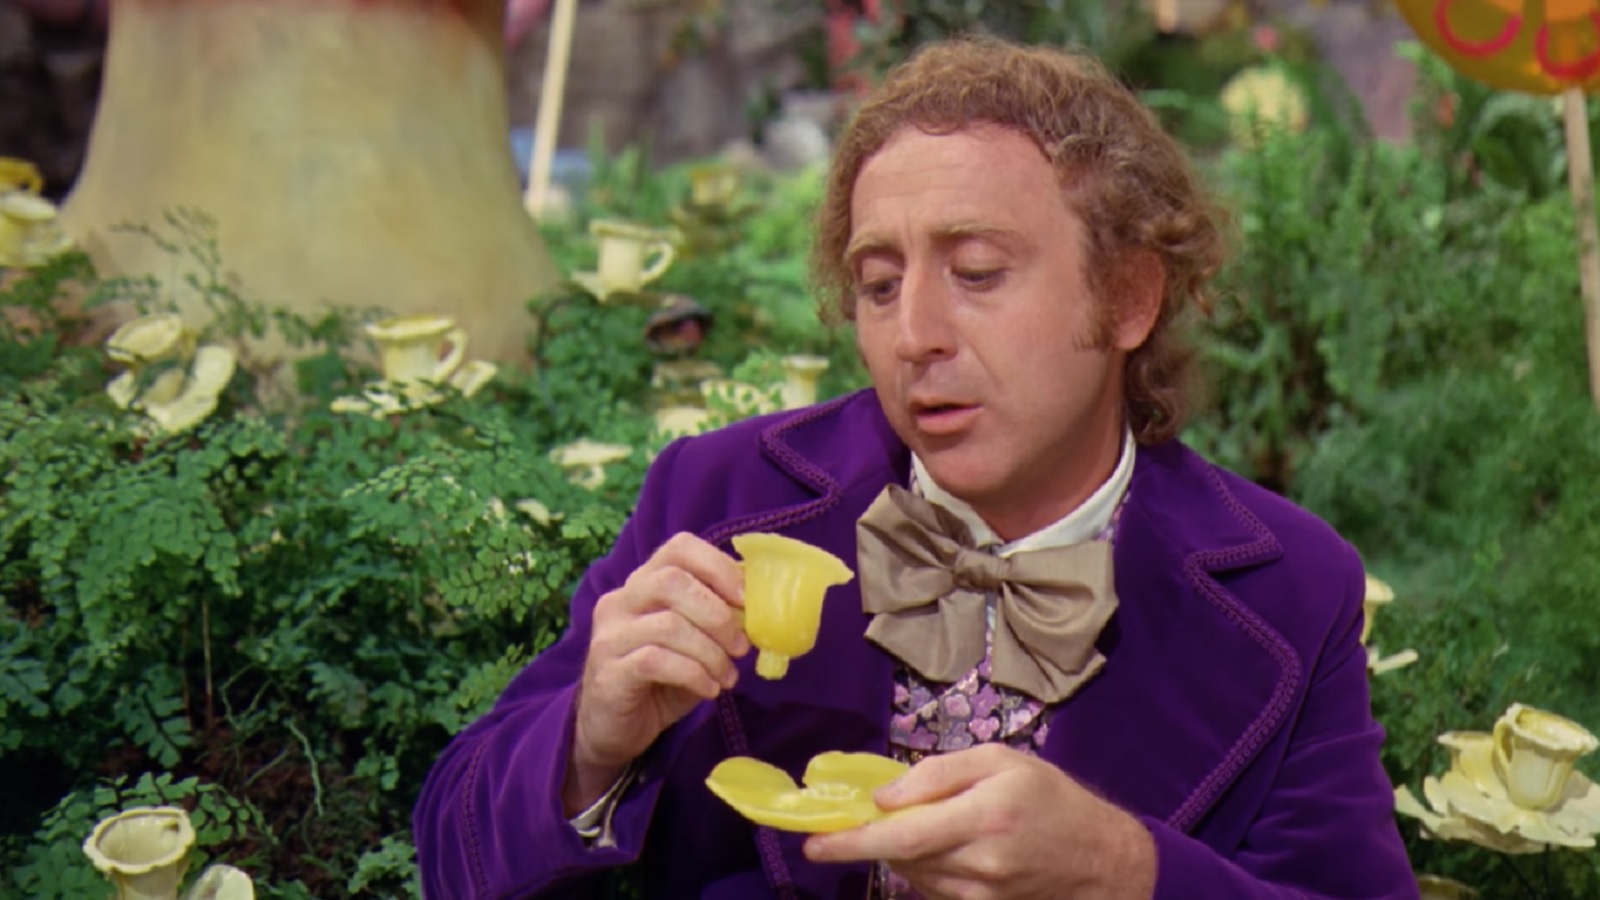 Pure Imagination Is What the World Needs to Cure Alzheimer’s